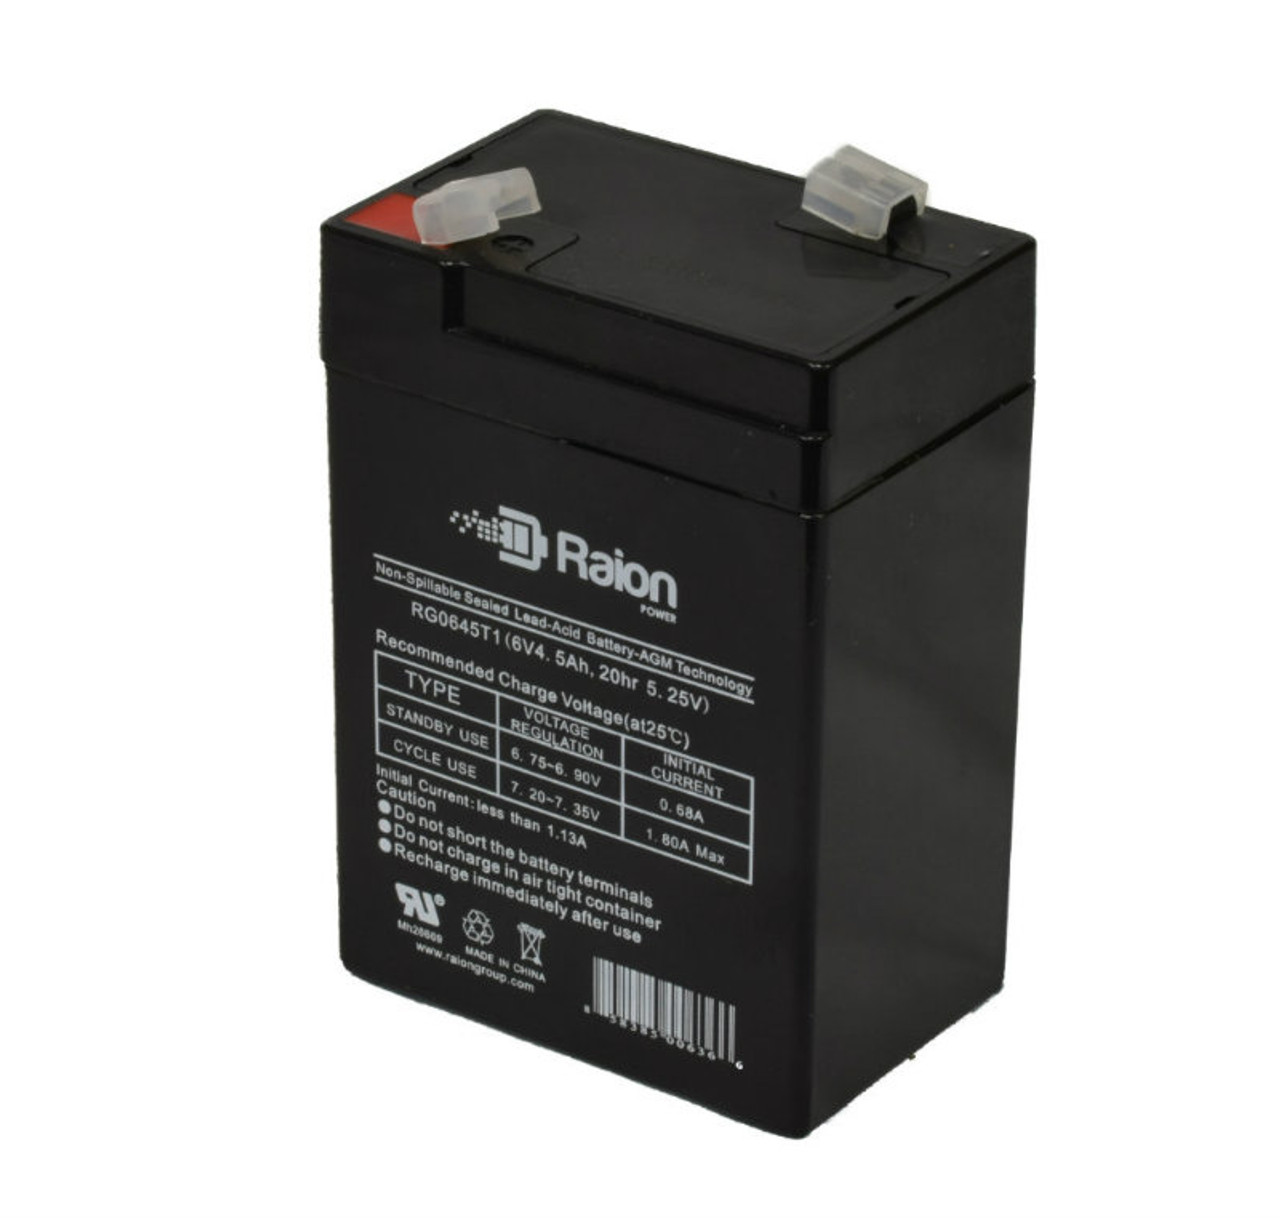 Raion Power RG0645T1 6V 4.5Ah Replacement Battery Cartridge for Chloride LIGHT 2